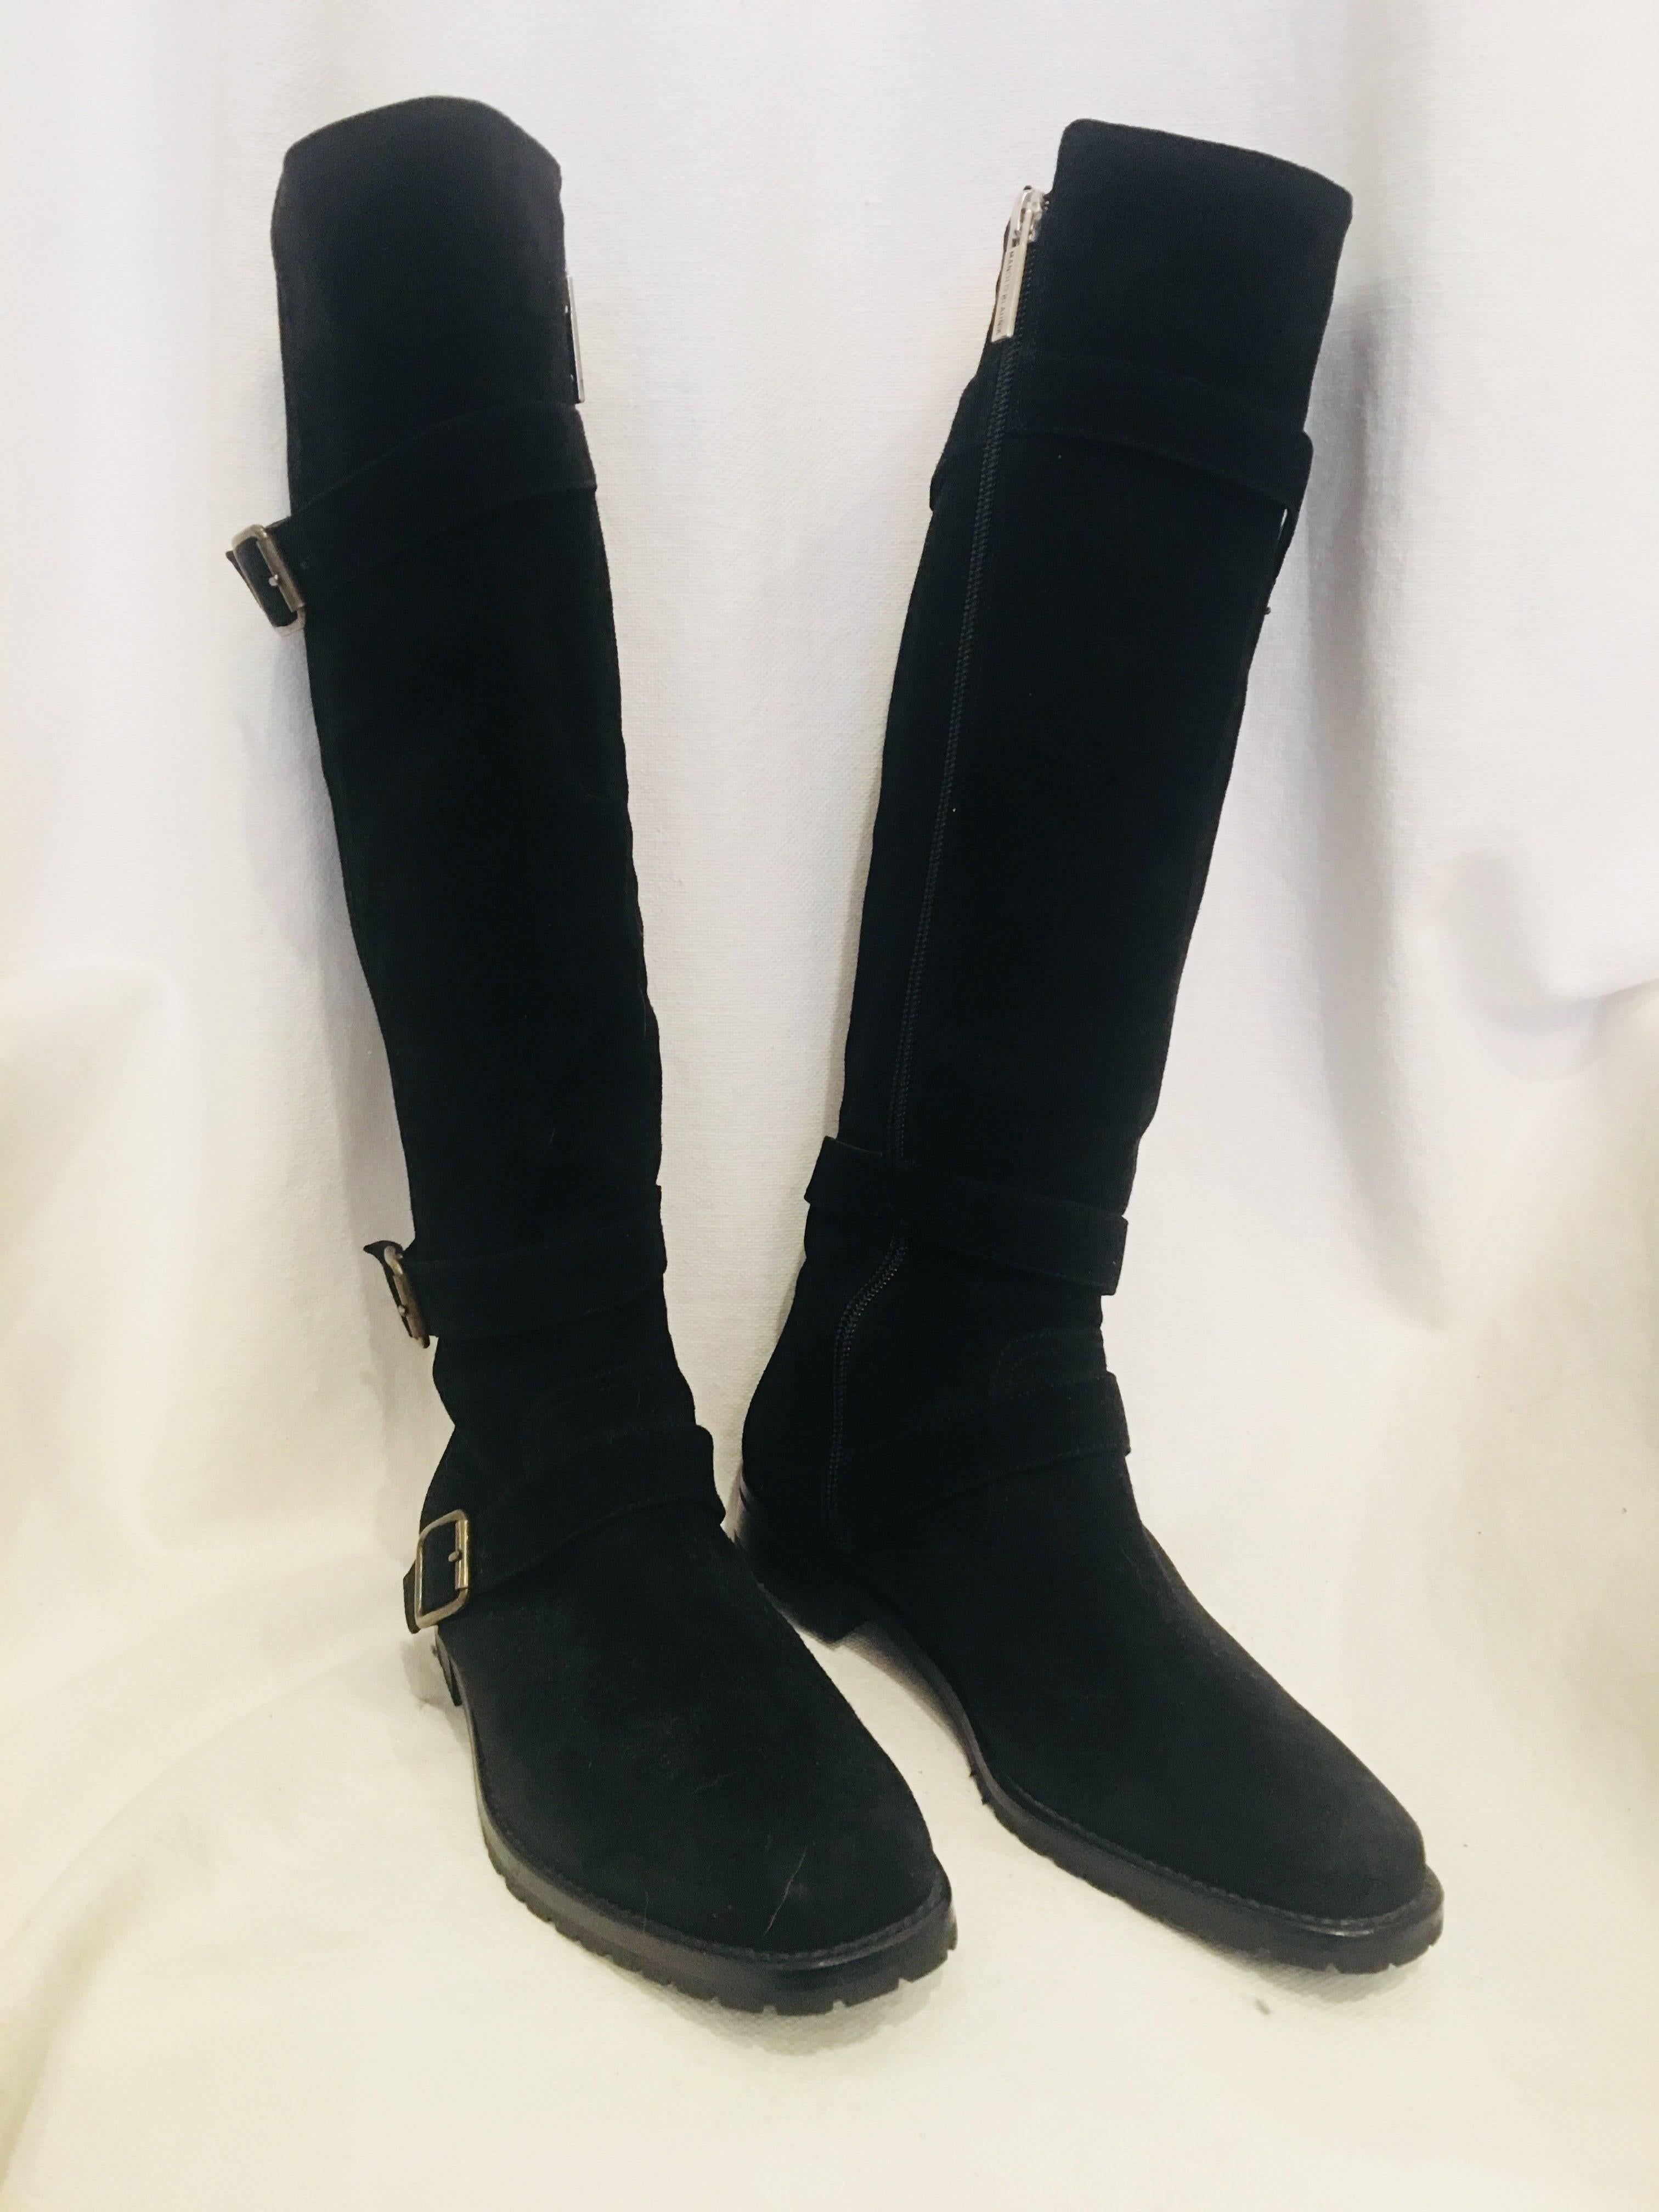 Manolo Blahnik Black Suede Mid-Calf Boots with Buckle Closures at Ankles